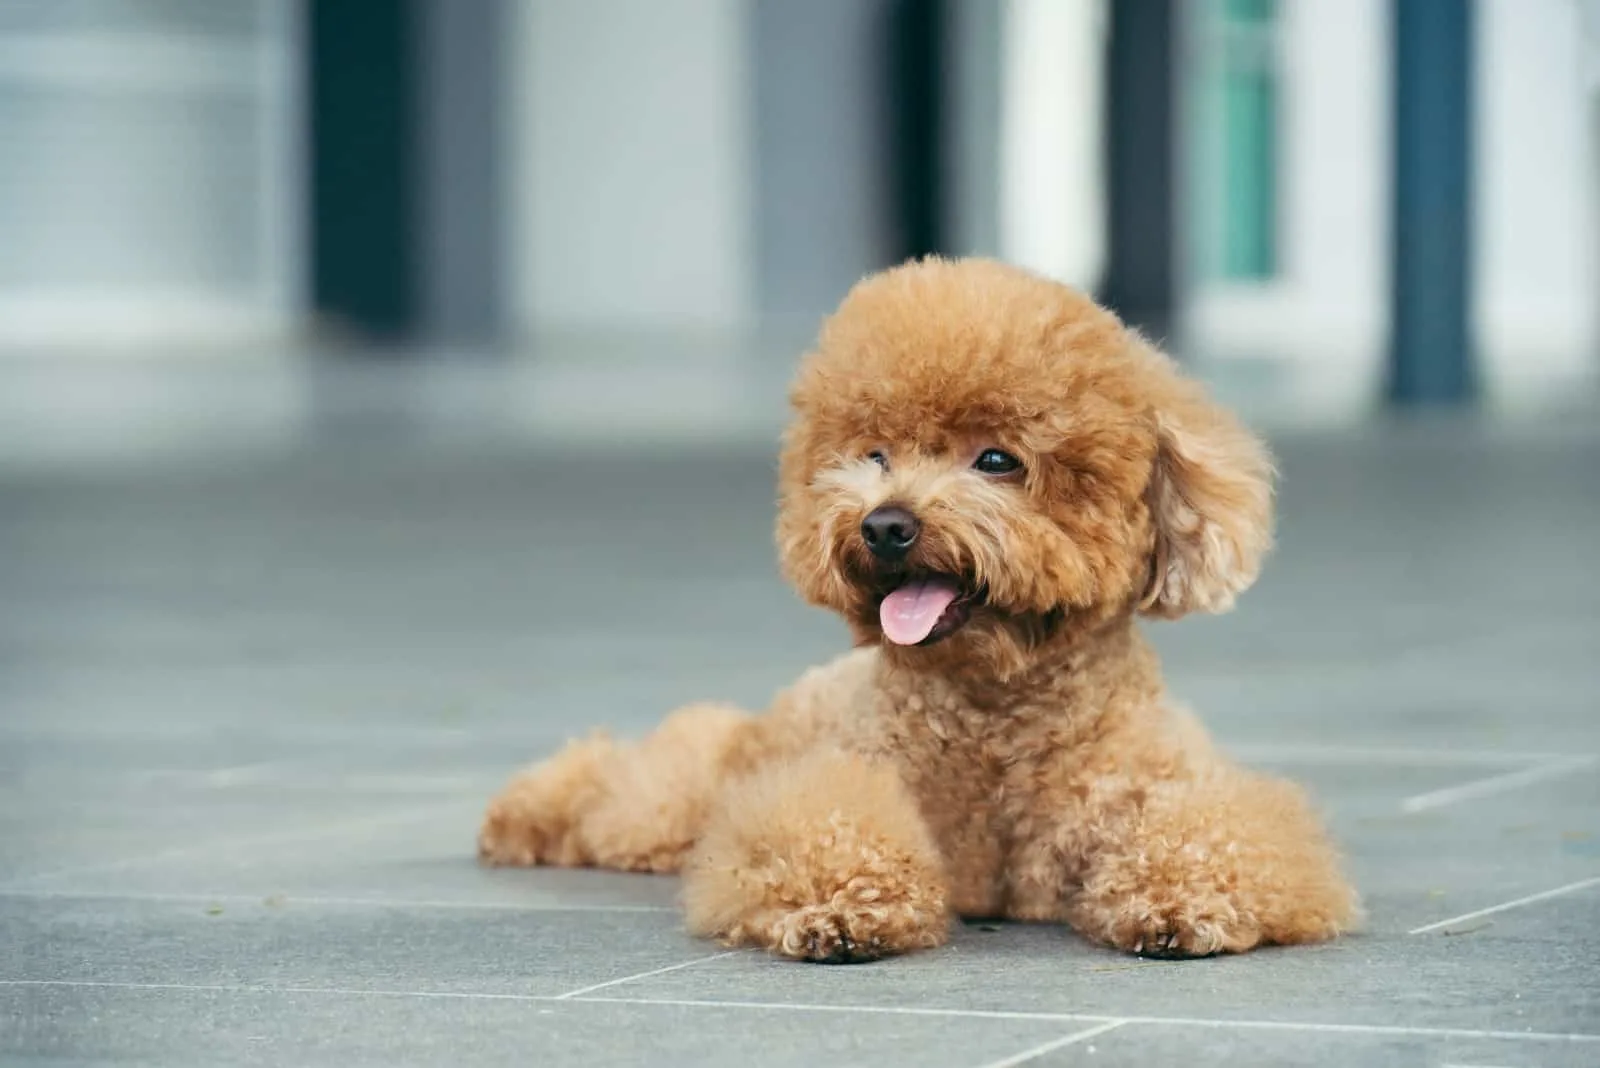 toy poodle resting on floor